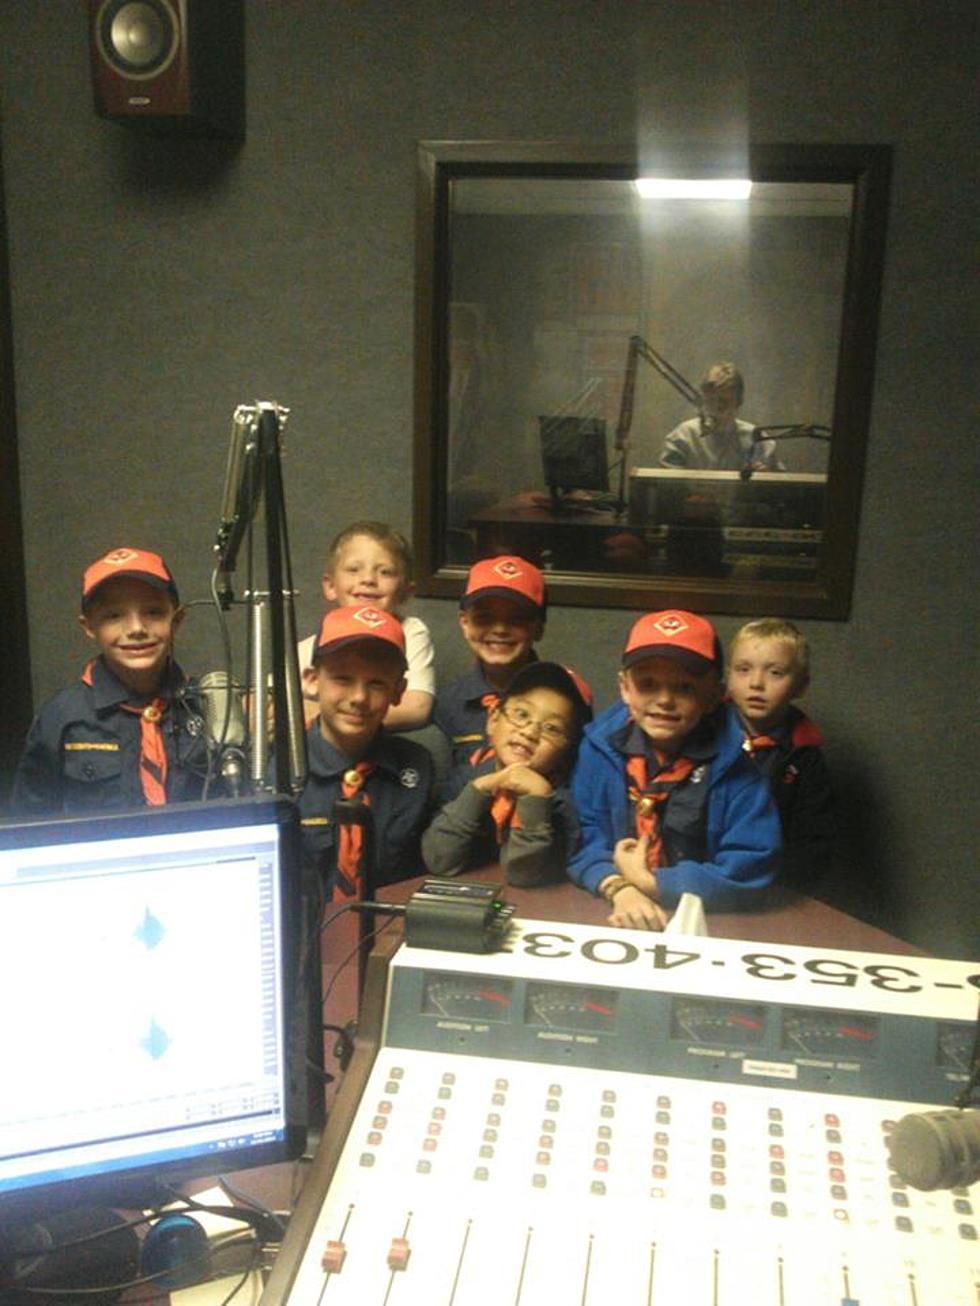 Cub Scouts Give A Special Tribute To All Armed Forces For Veterans Day – AUDIO